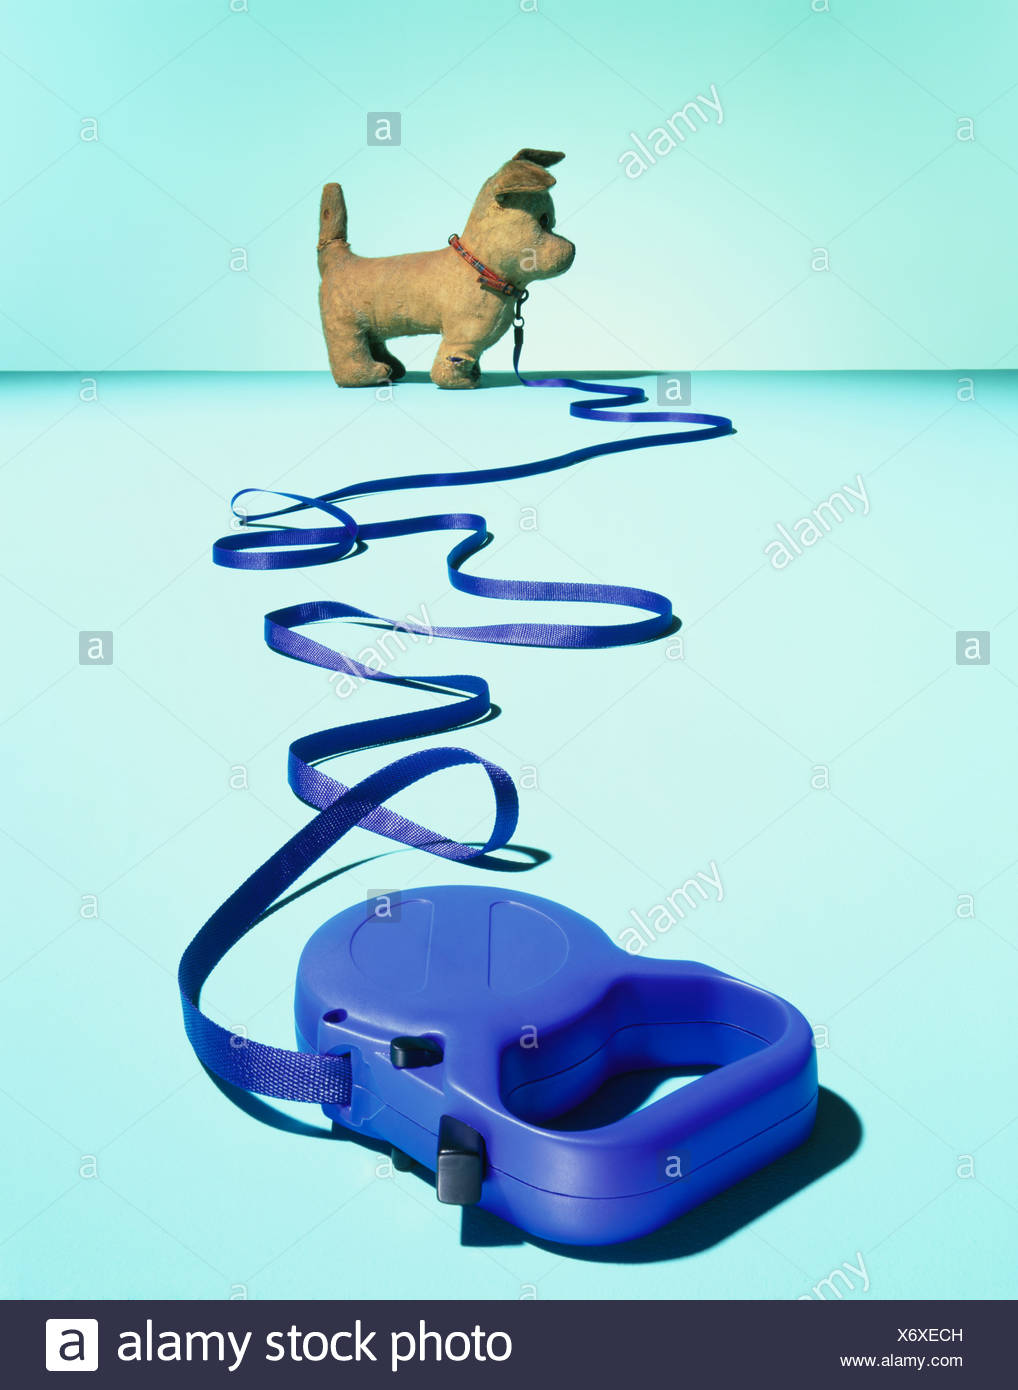 puppy on a lead toy